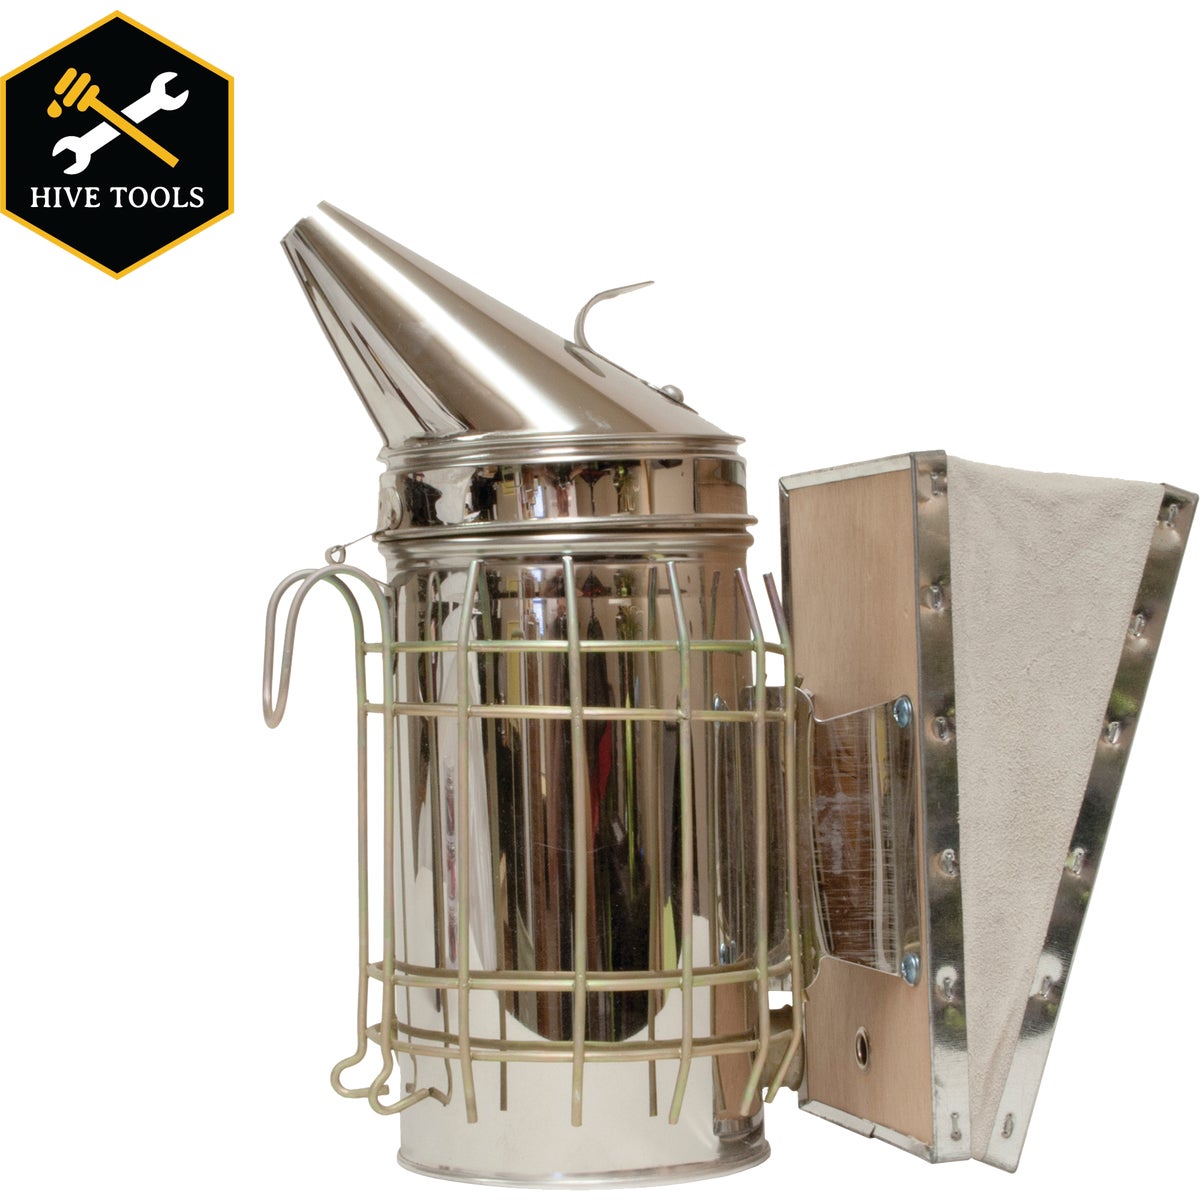 Item 704015, Standard smoker ideal for any hive maintenance tool kit.